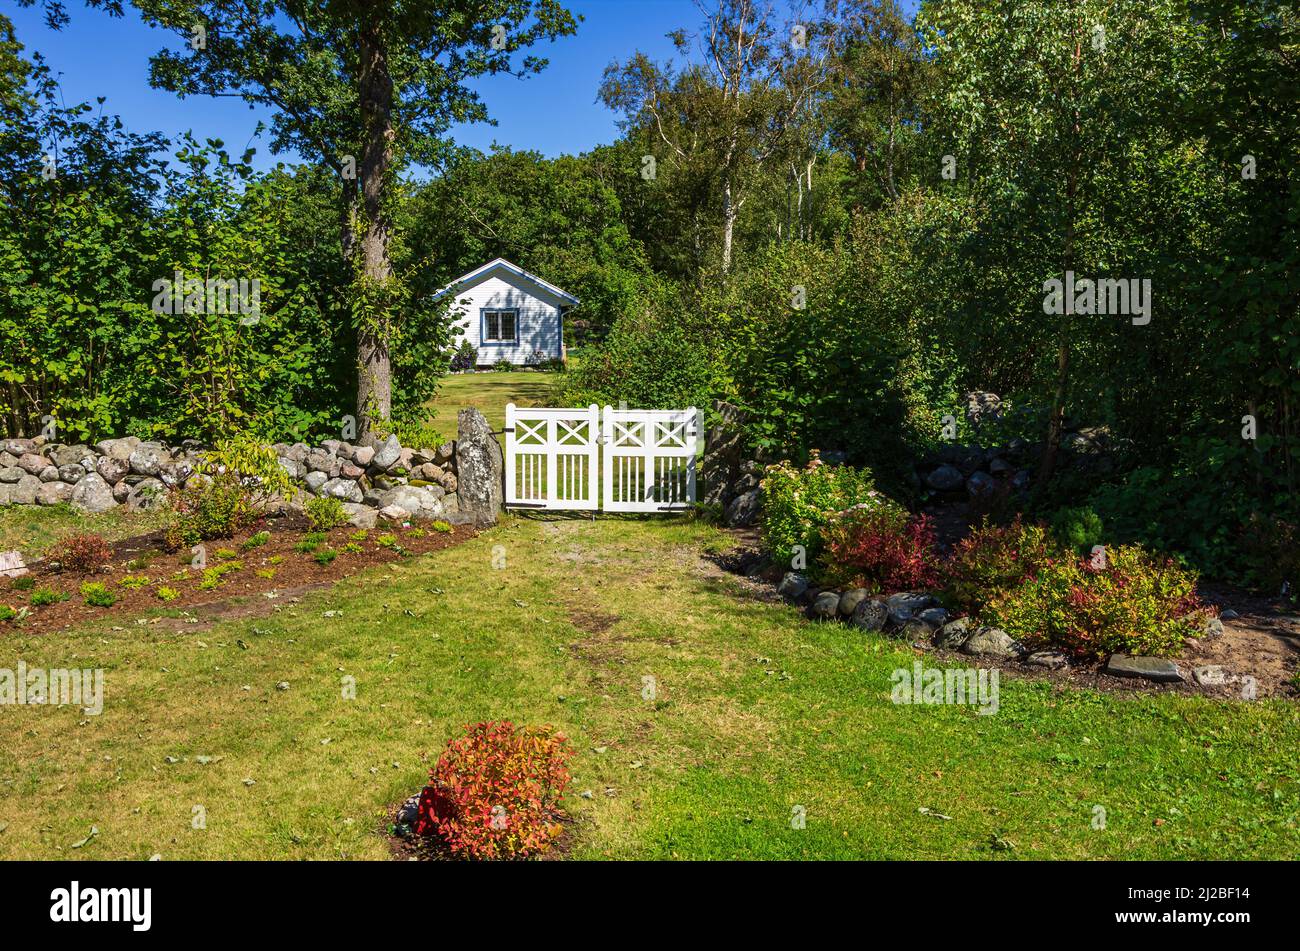 Idyllic property with small cottage and garden gate situated in the green, South Koster Island, Bohuslän, Västra Götalands län, Sweden. Stock Photo